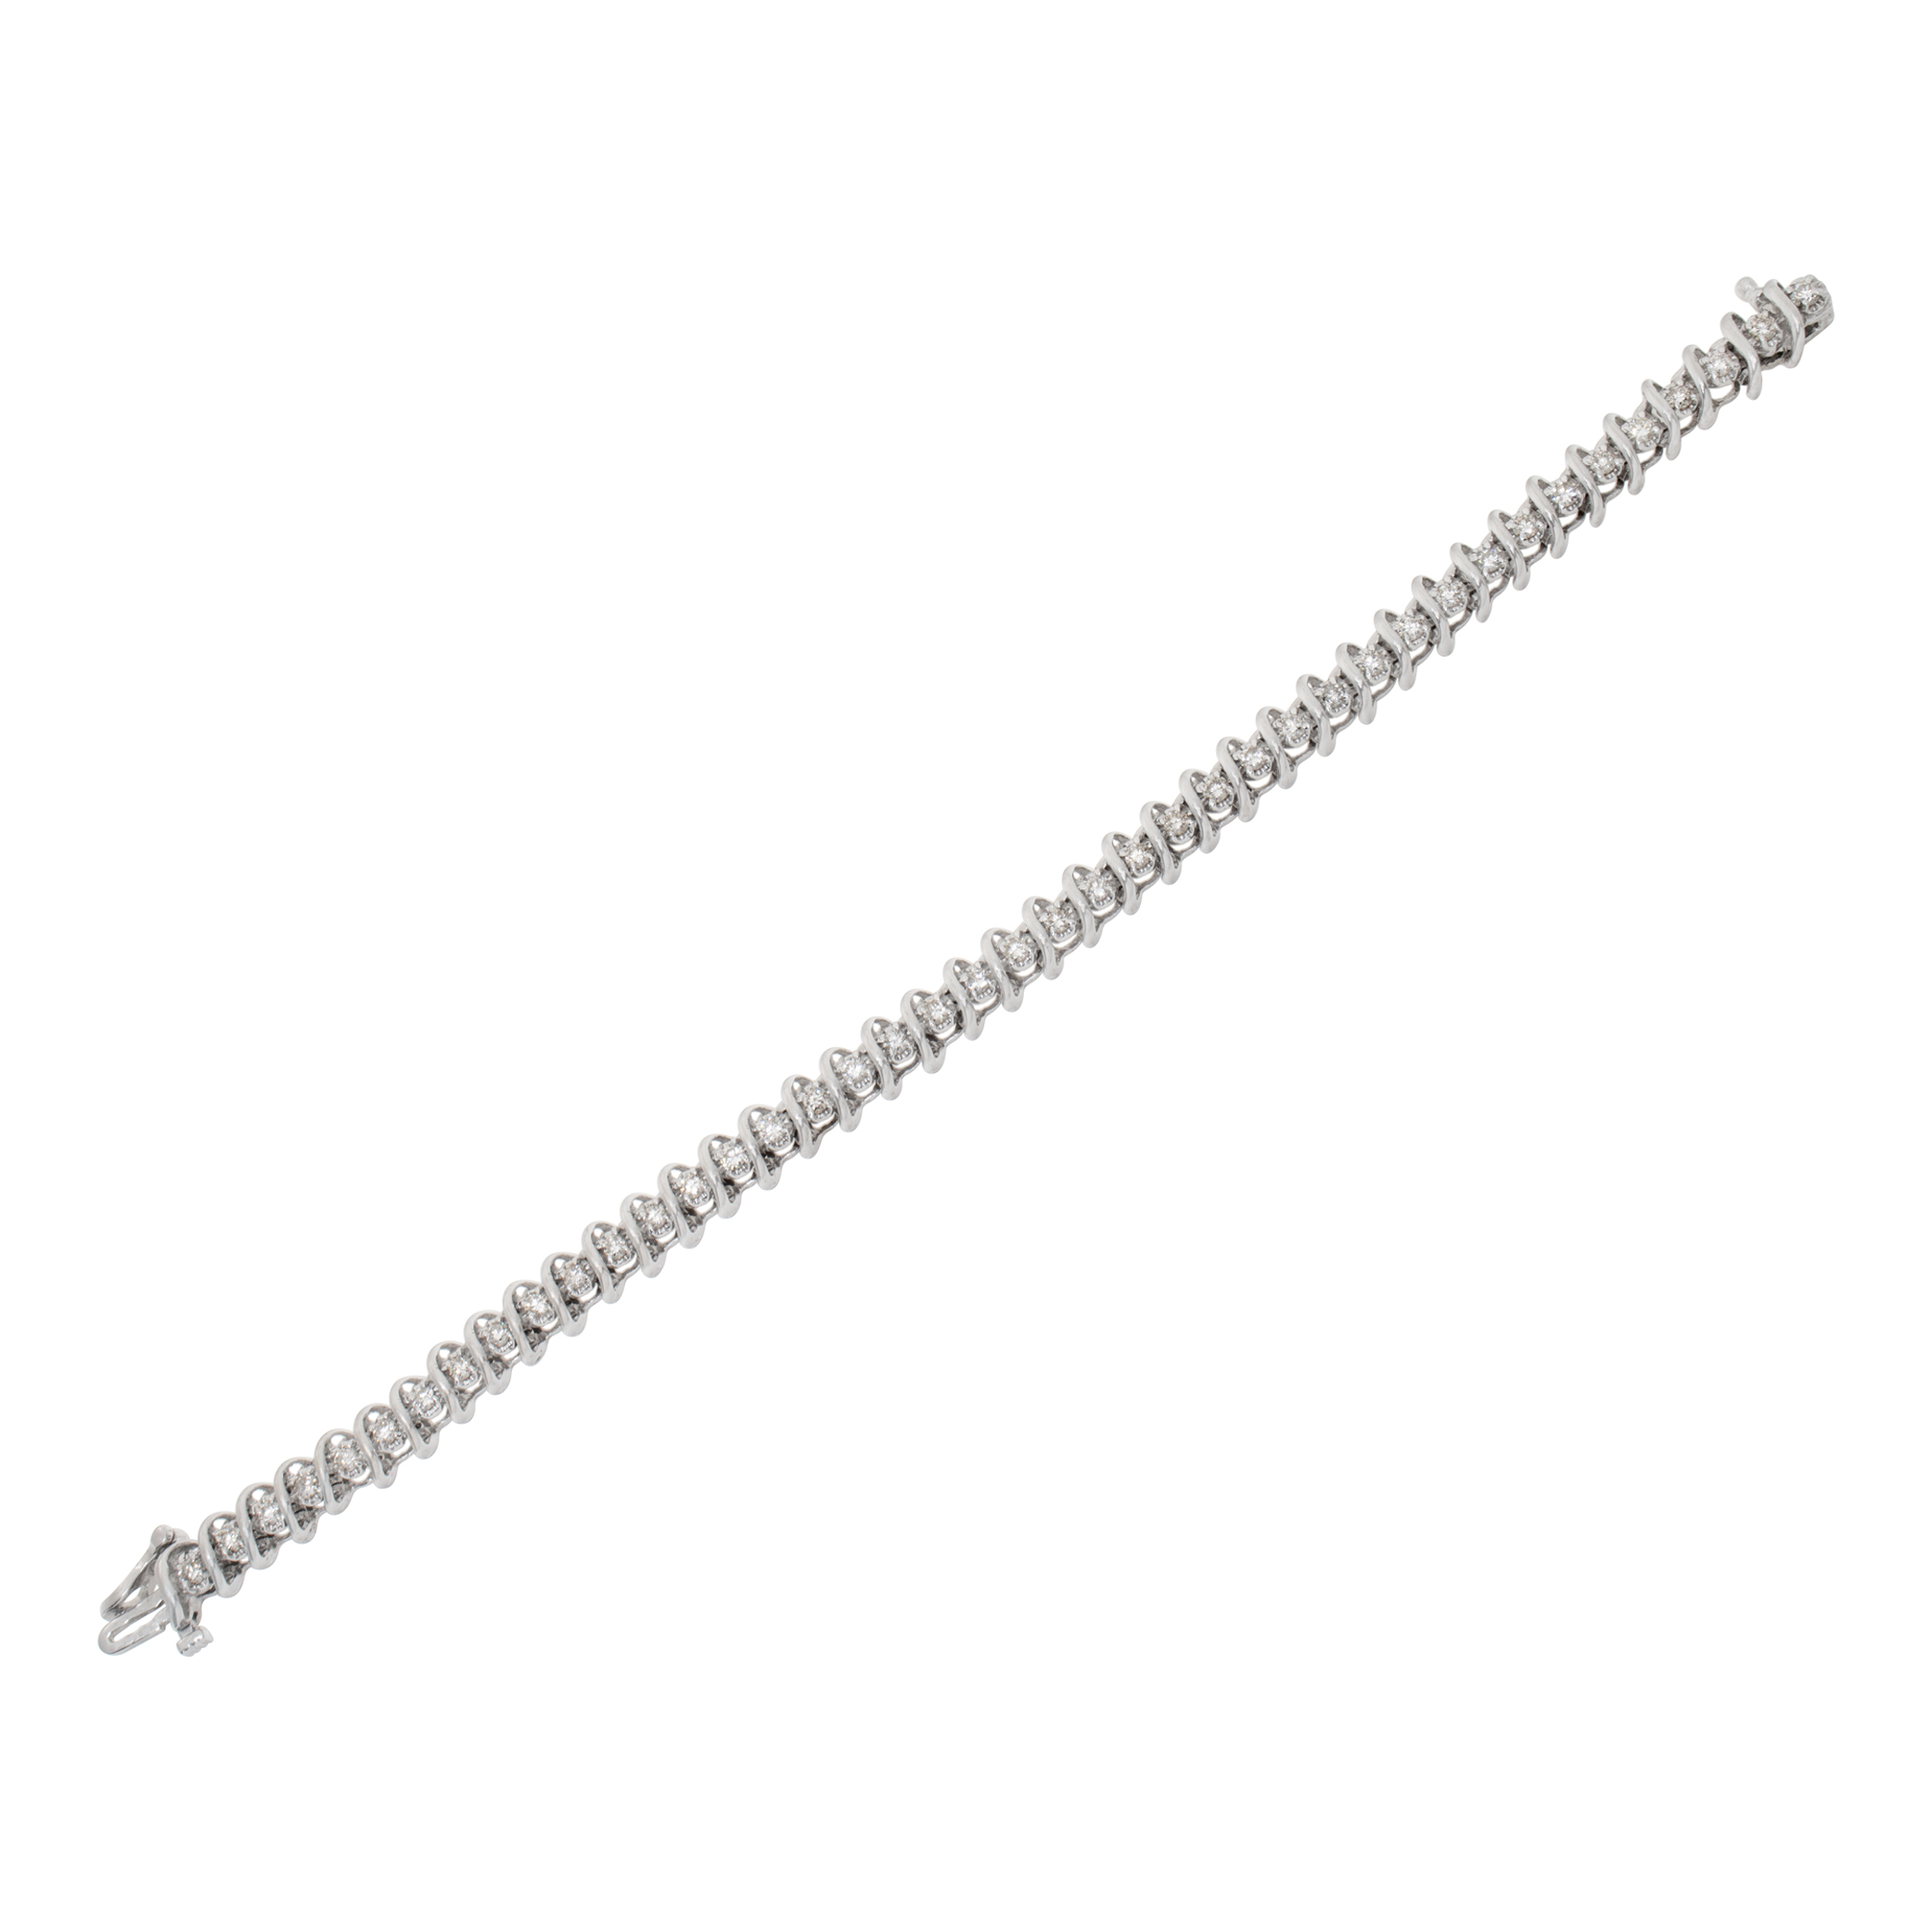 Diamond line bracelet in 14k white gold with approximately 2 carats in round diamonds H-I Color, SI2 Clarity. Length 7.25 inches. (Stones) image 2